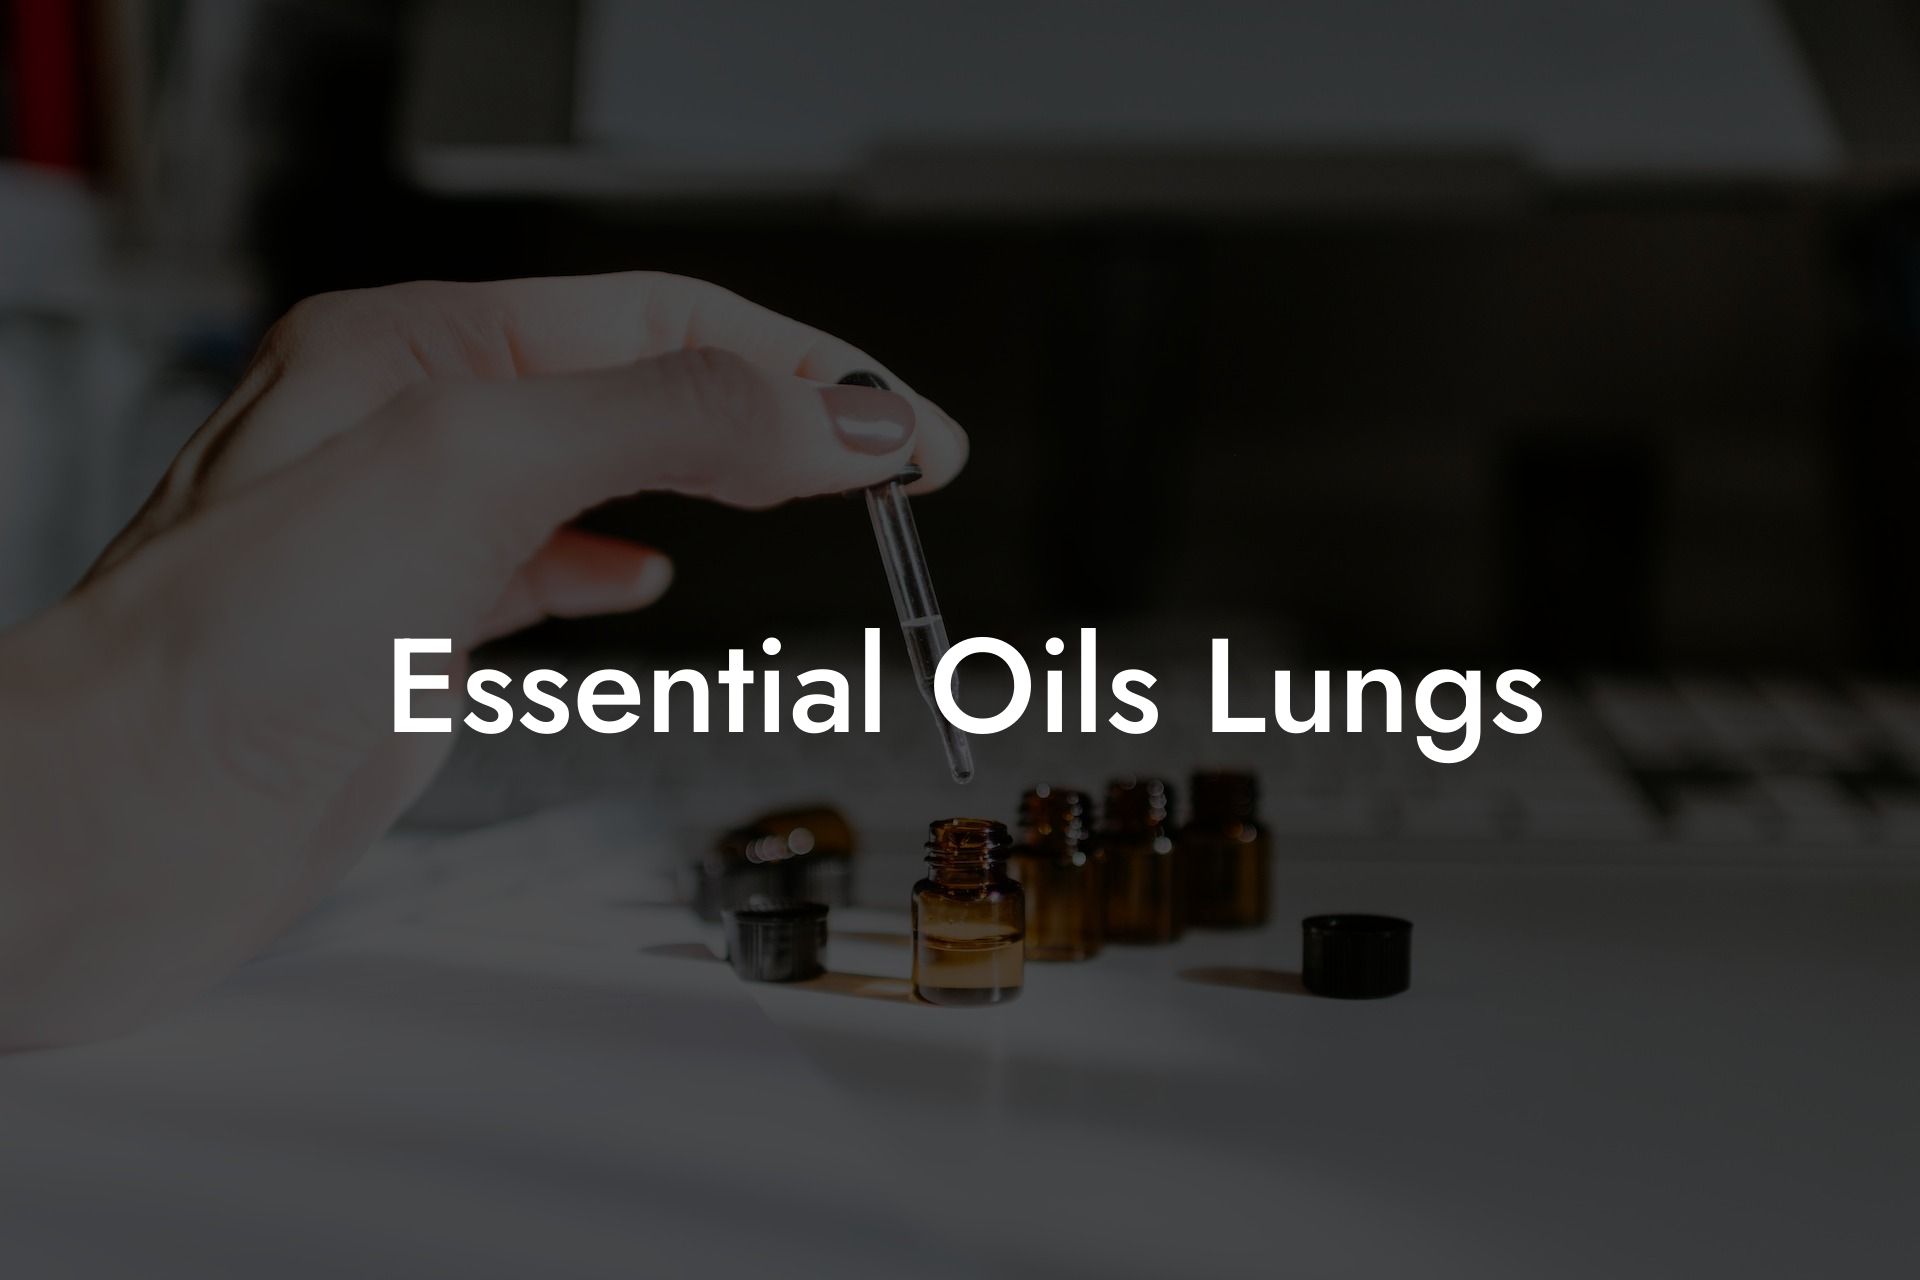 Essential Oils Lungs